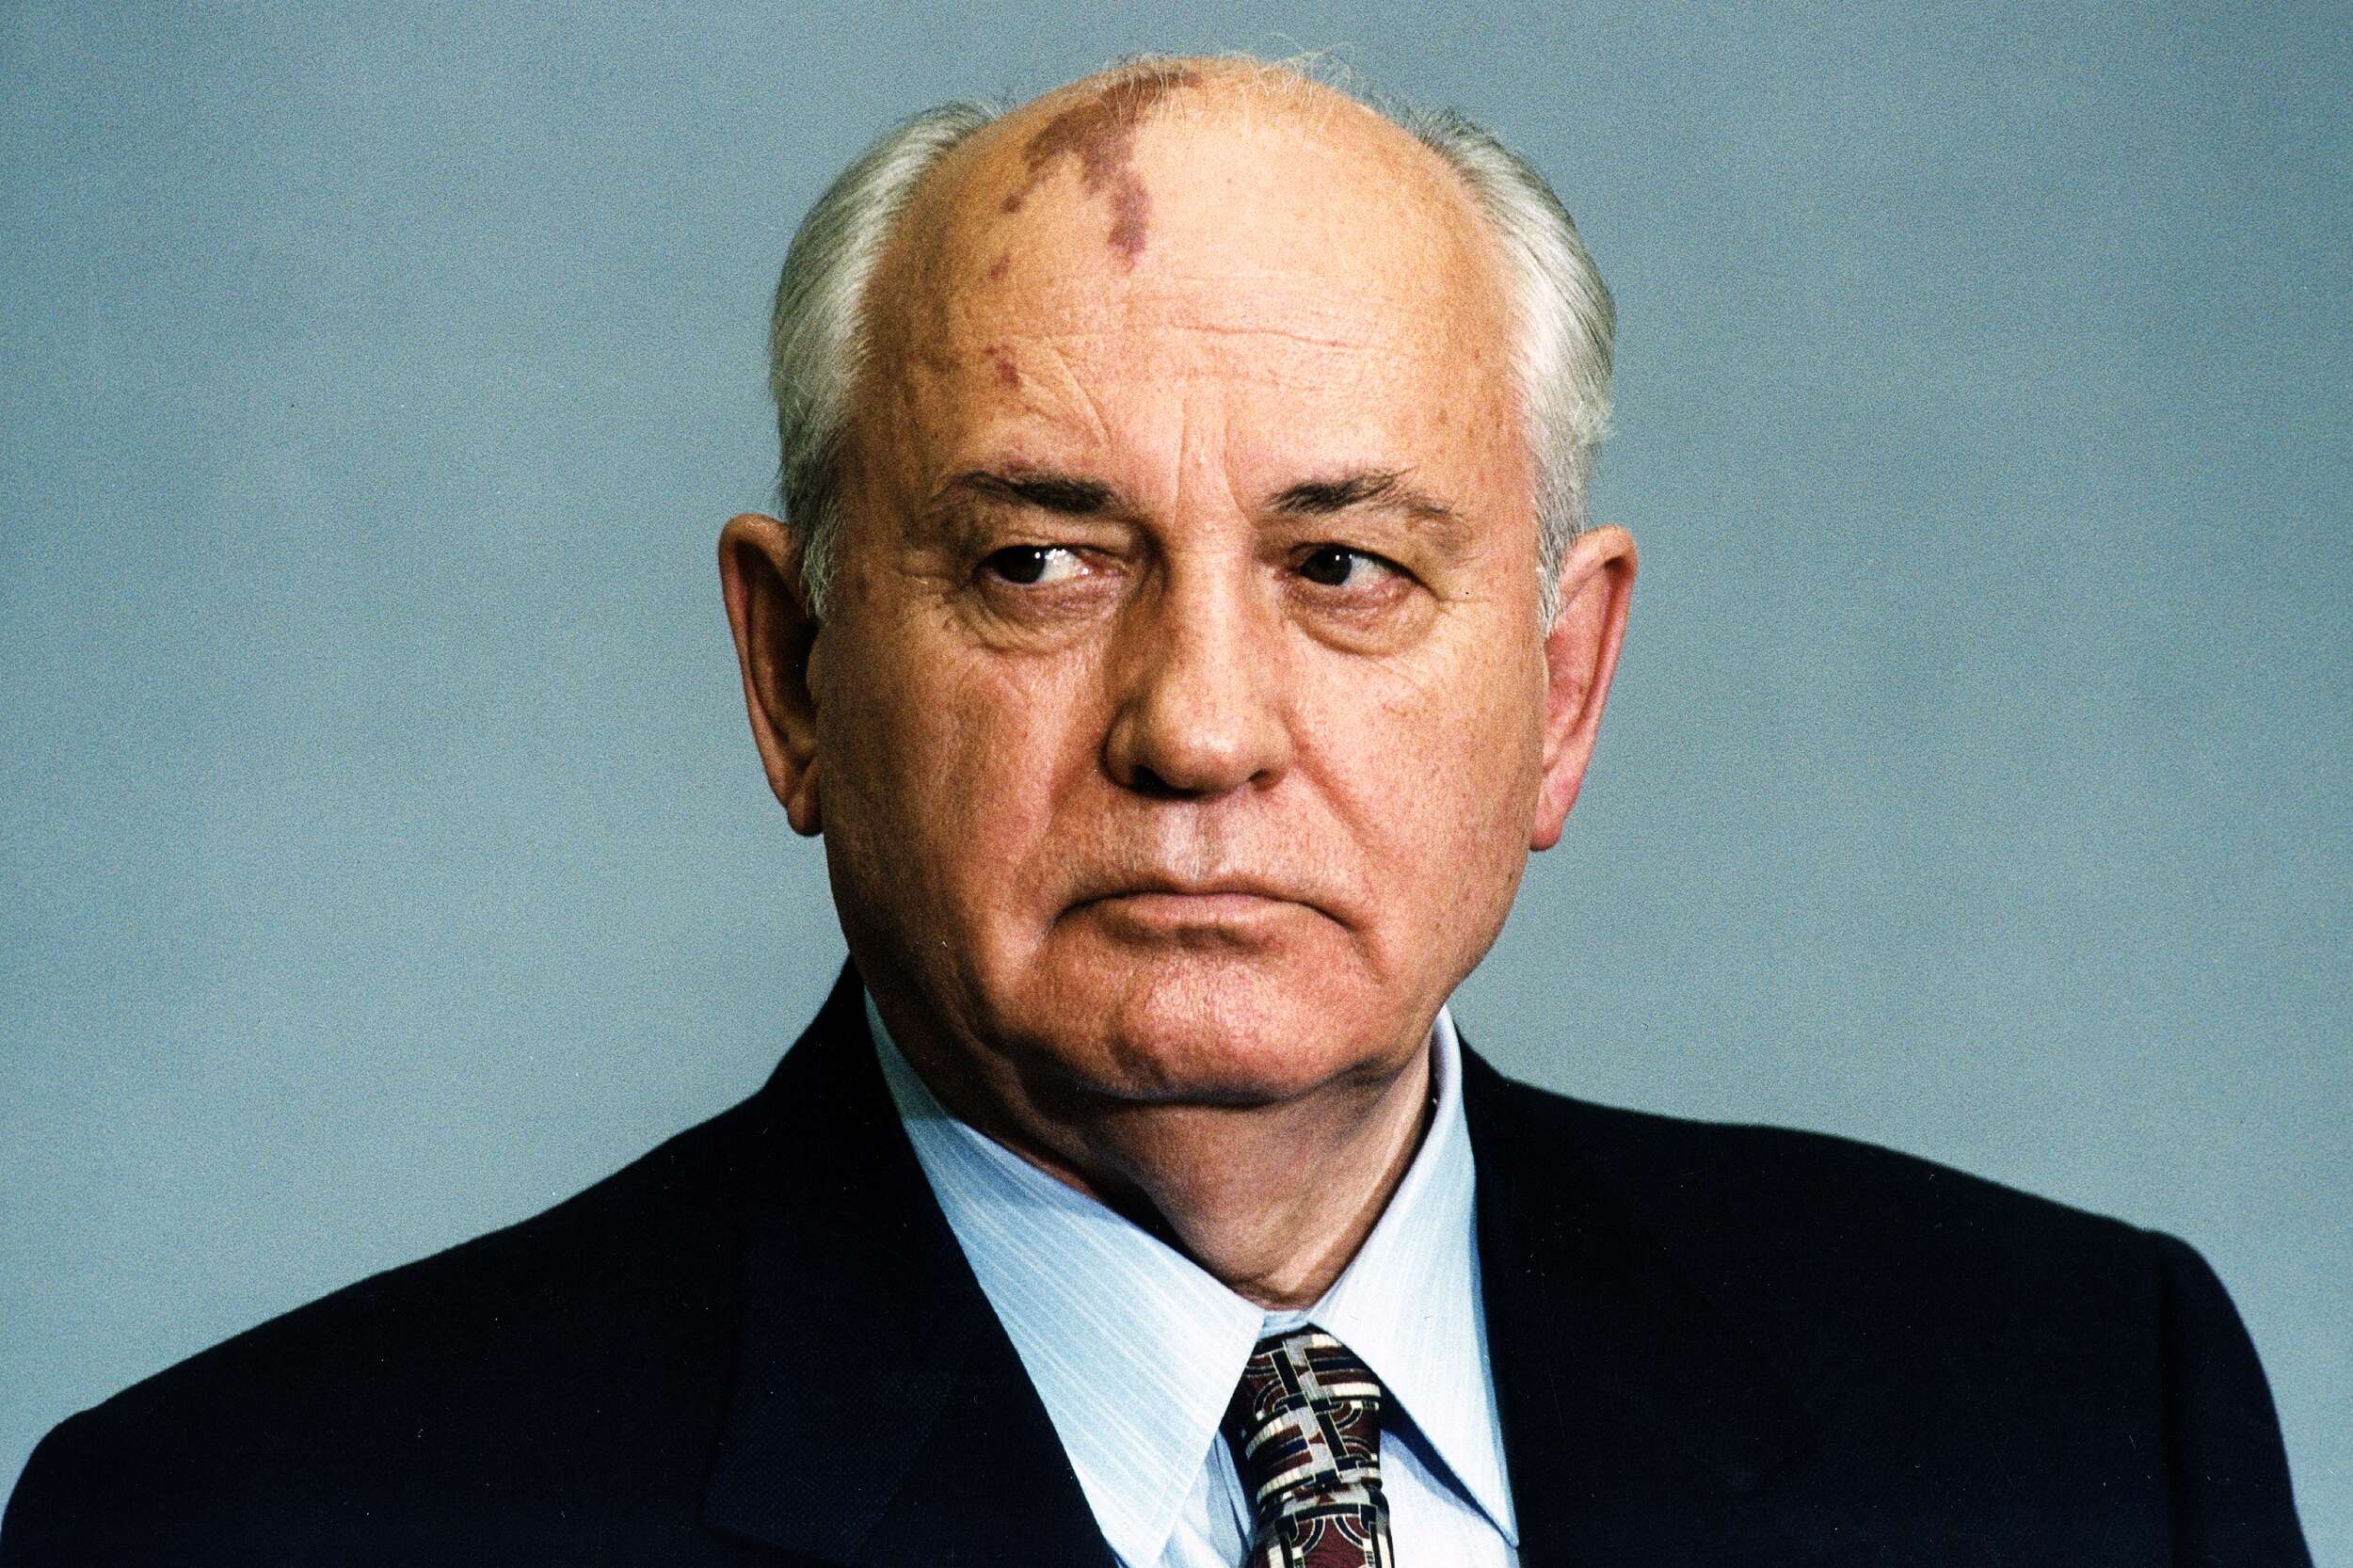 Mikhail Gorbachev, Soviet leader who helped end the Cold War, died at 91